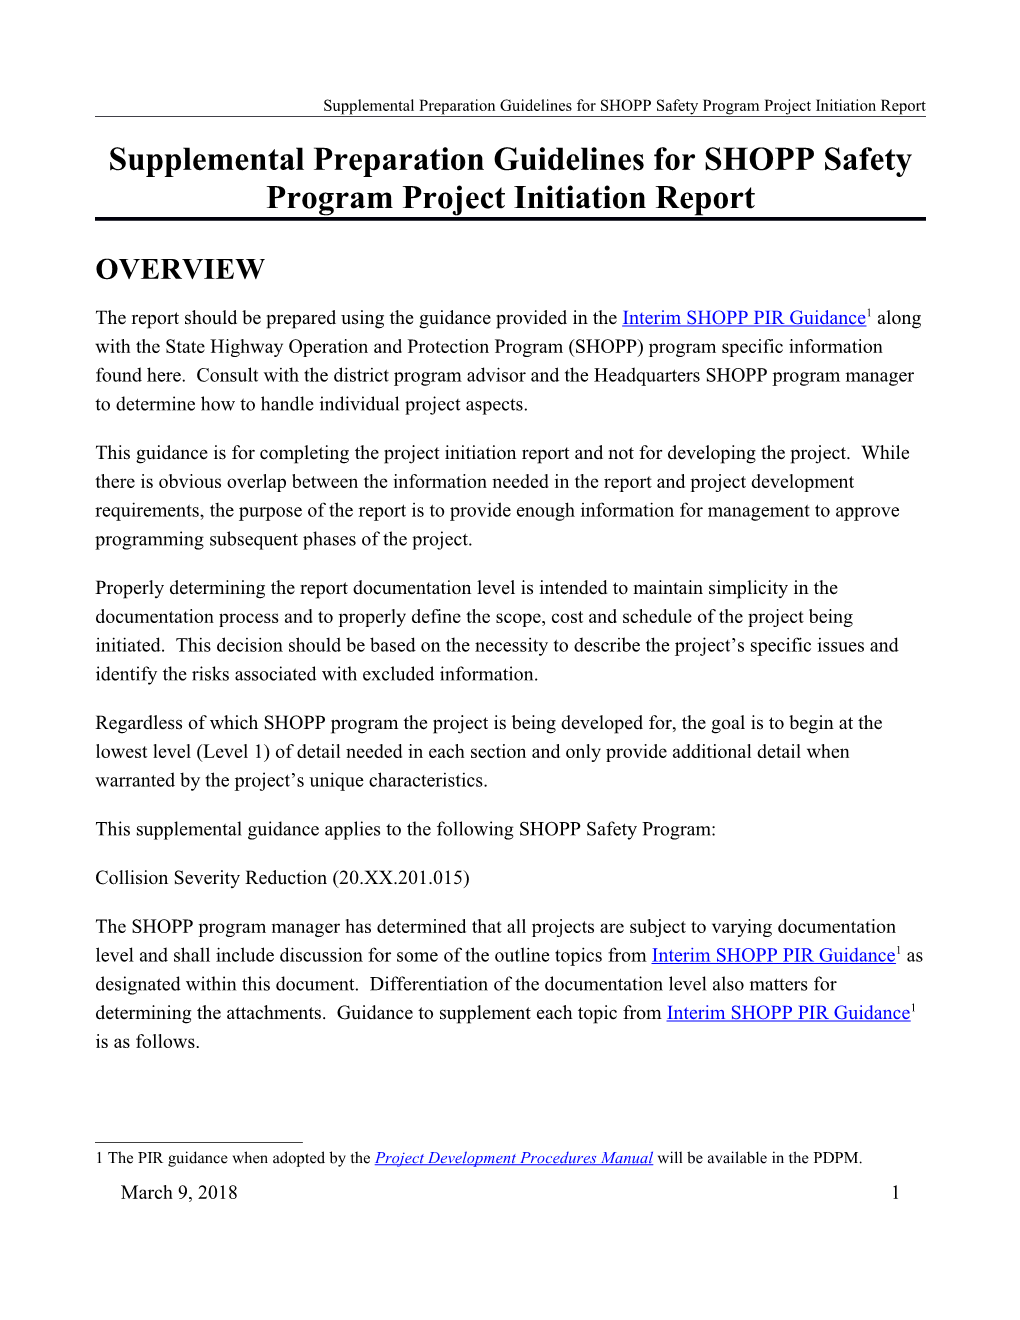 Supplemental Preparation Guidelines for SHOPP Safety Program Project Initiation Report